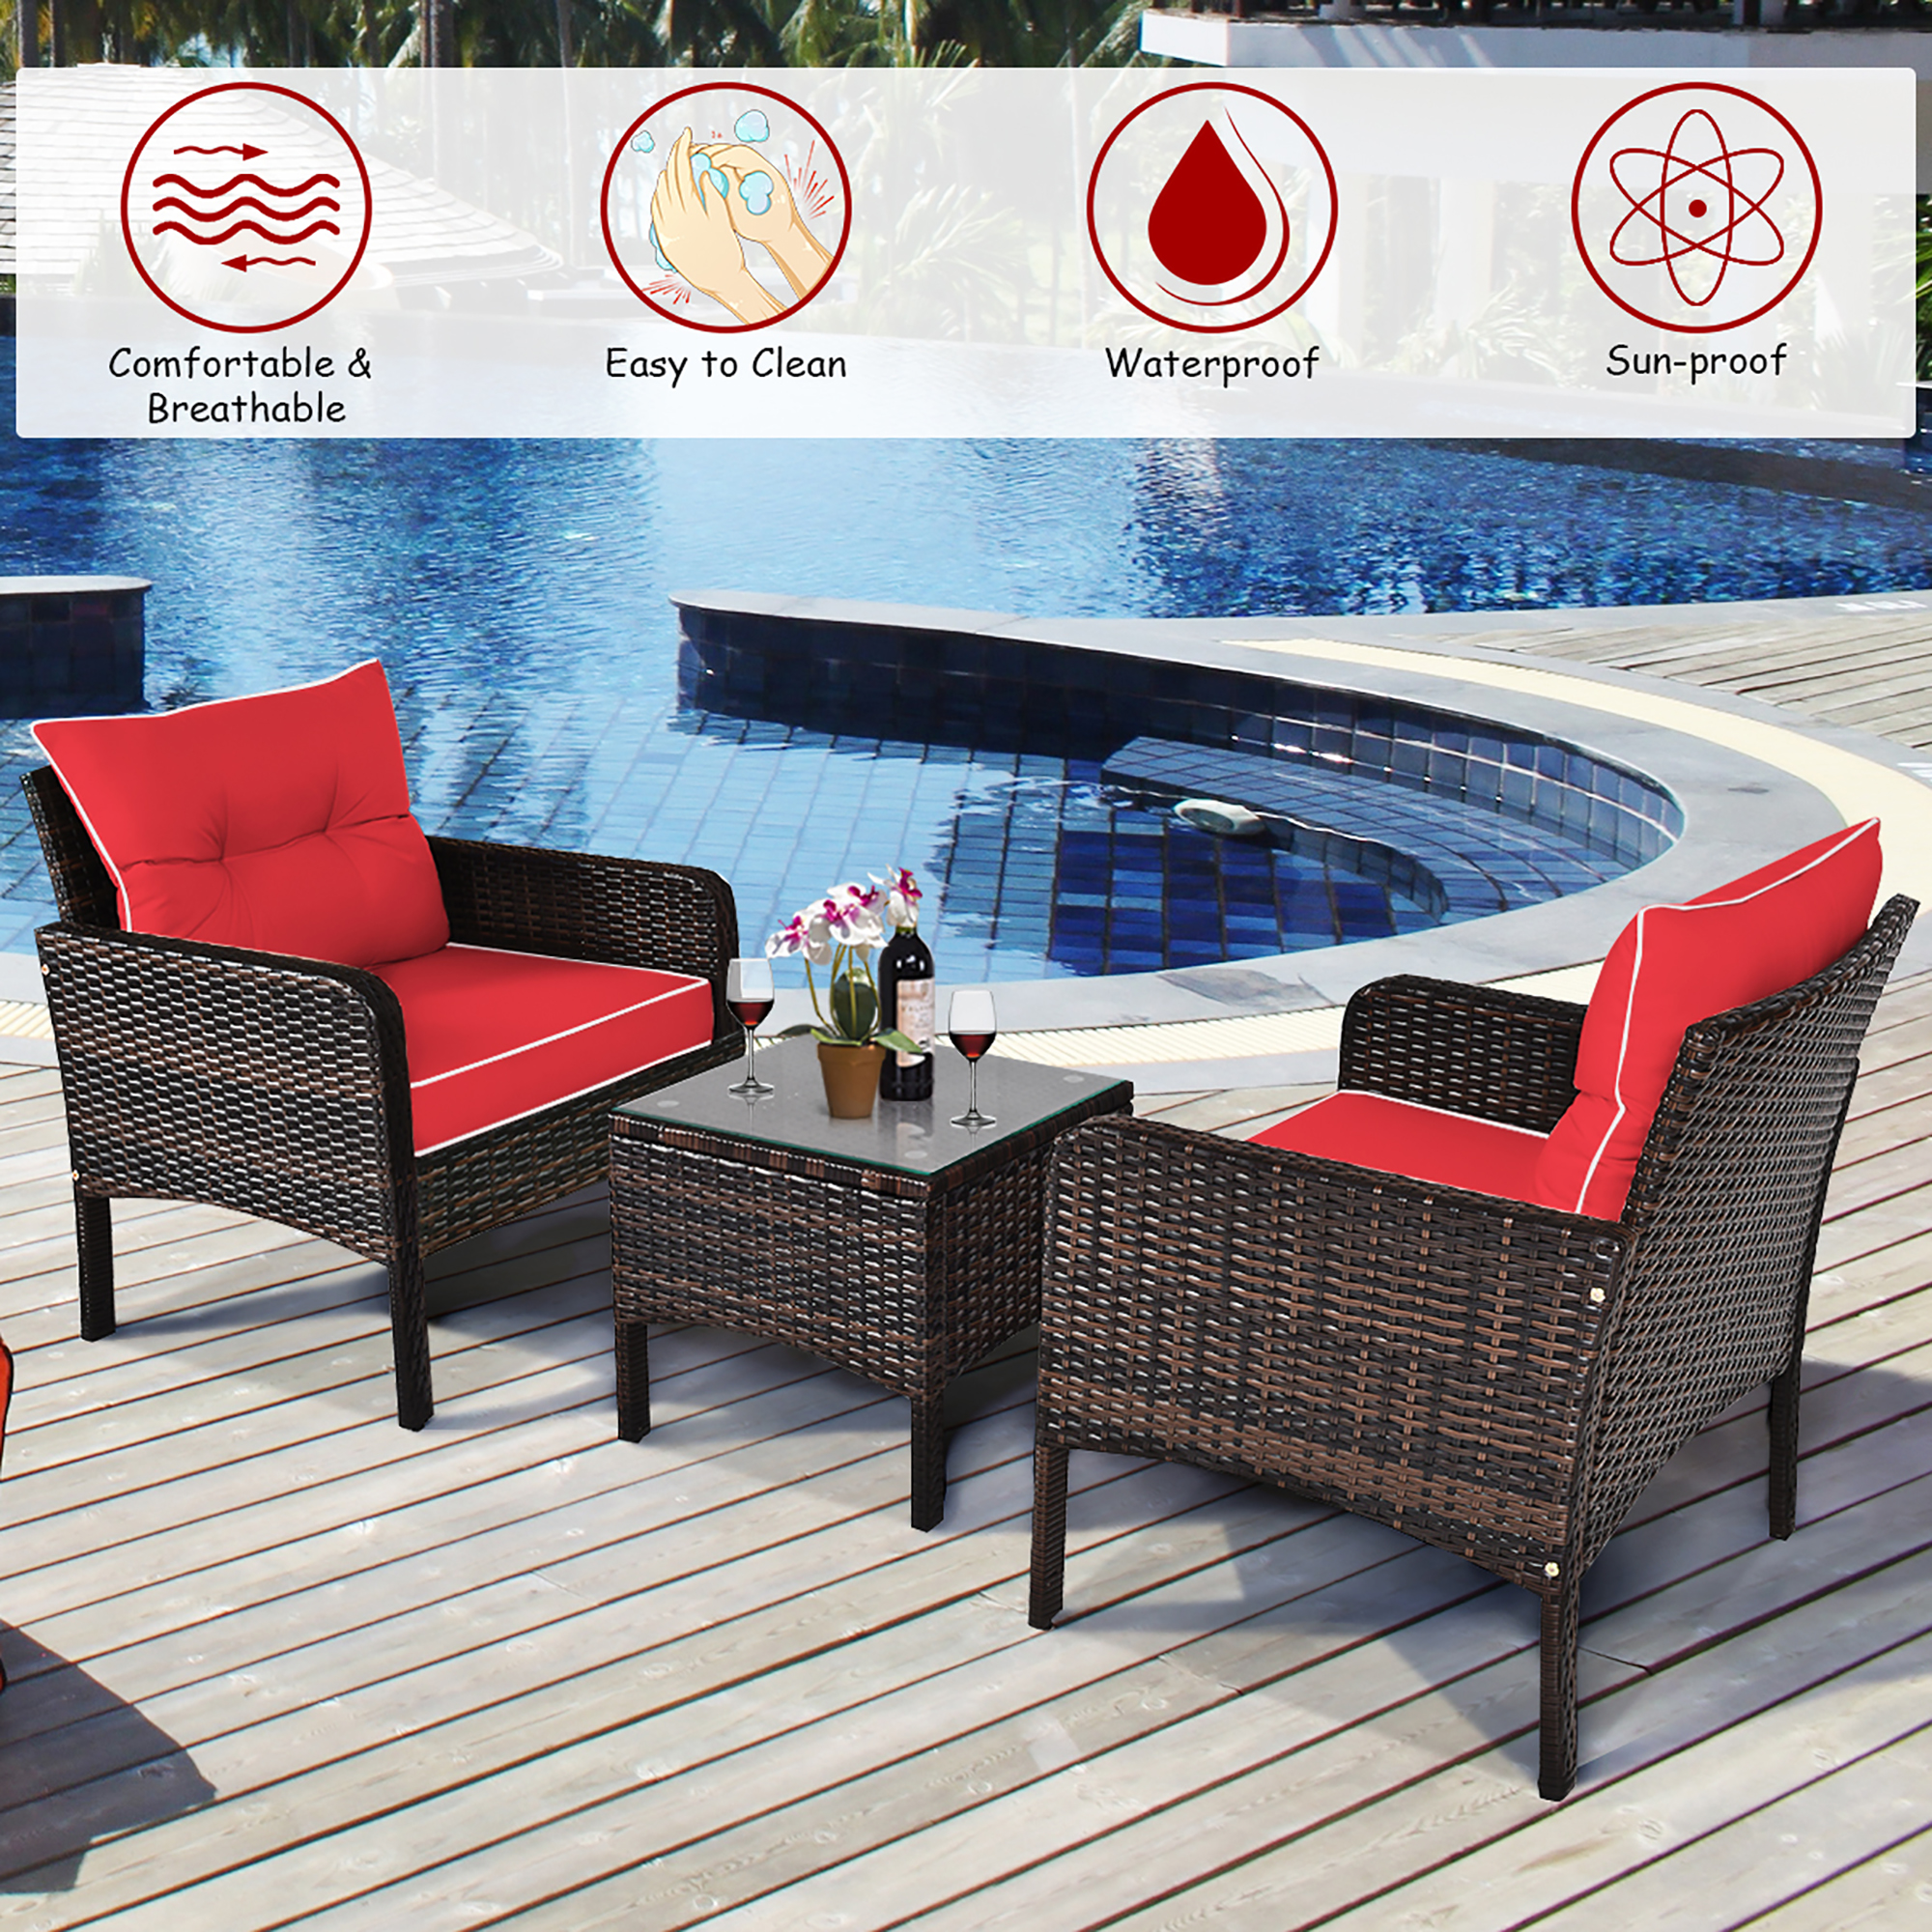 Costway 3PCS Outdoor Rattan Conversation Set Patio Furniture Cushioned Sofa Chair Red - image 5 of 9